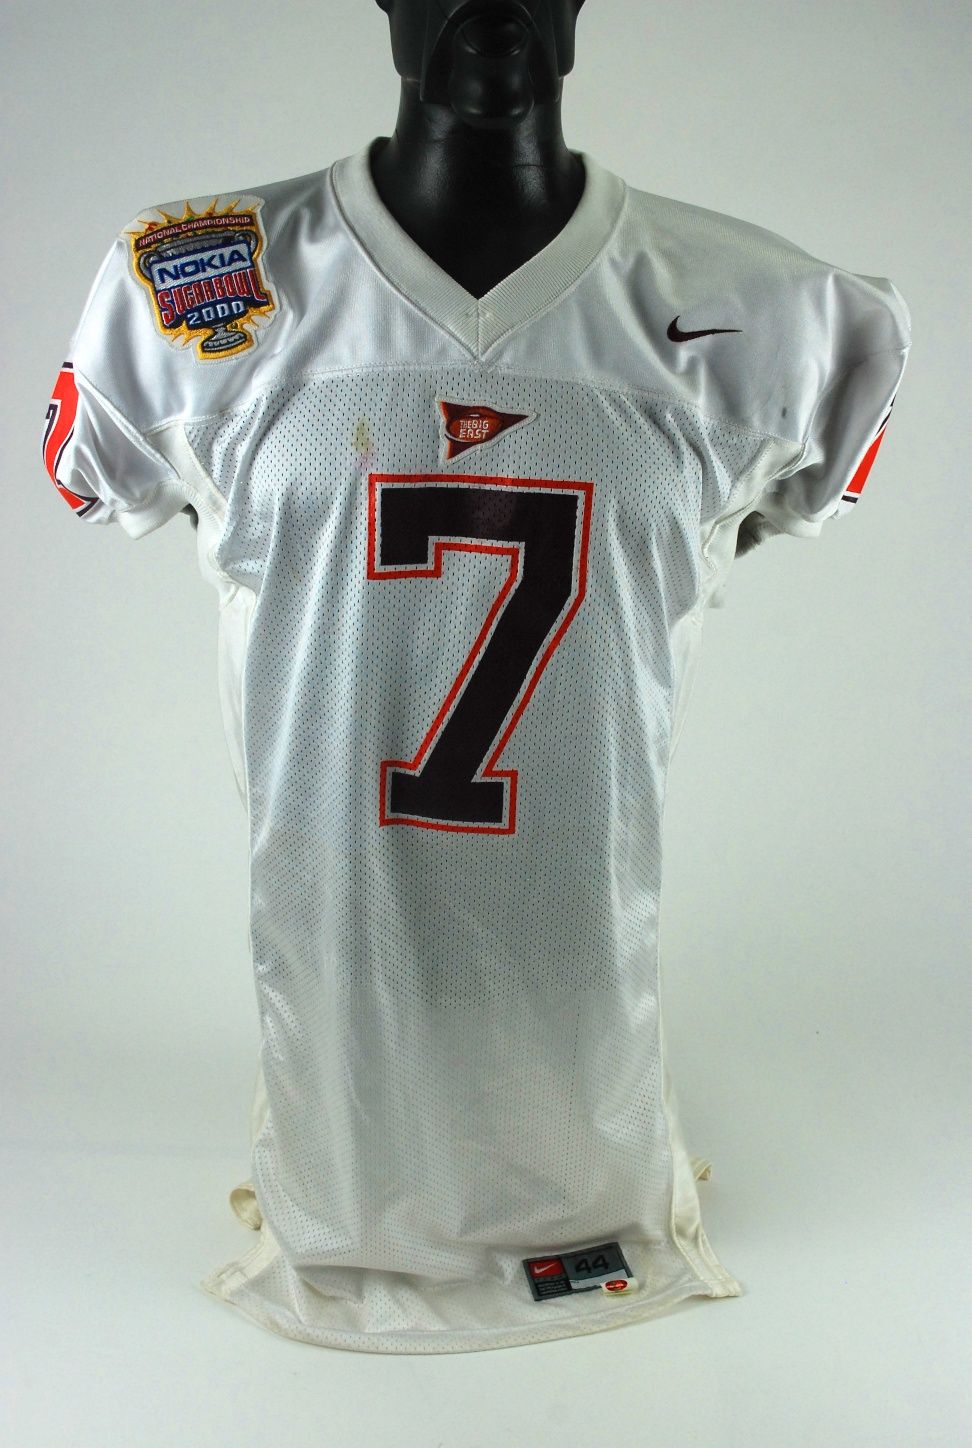 mike vick vt jersey